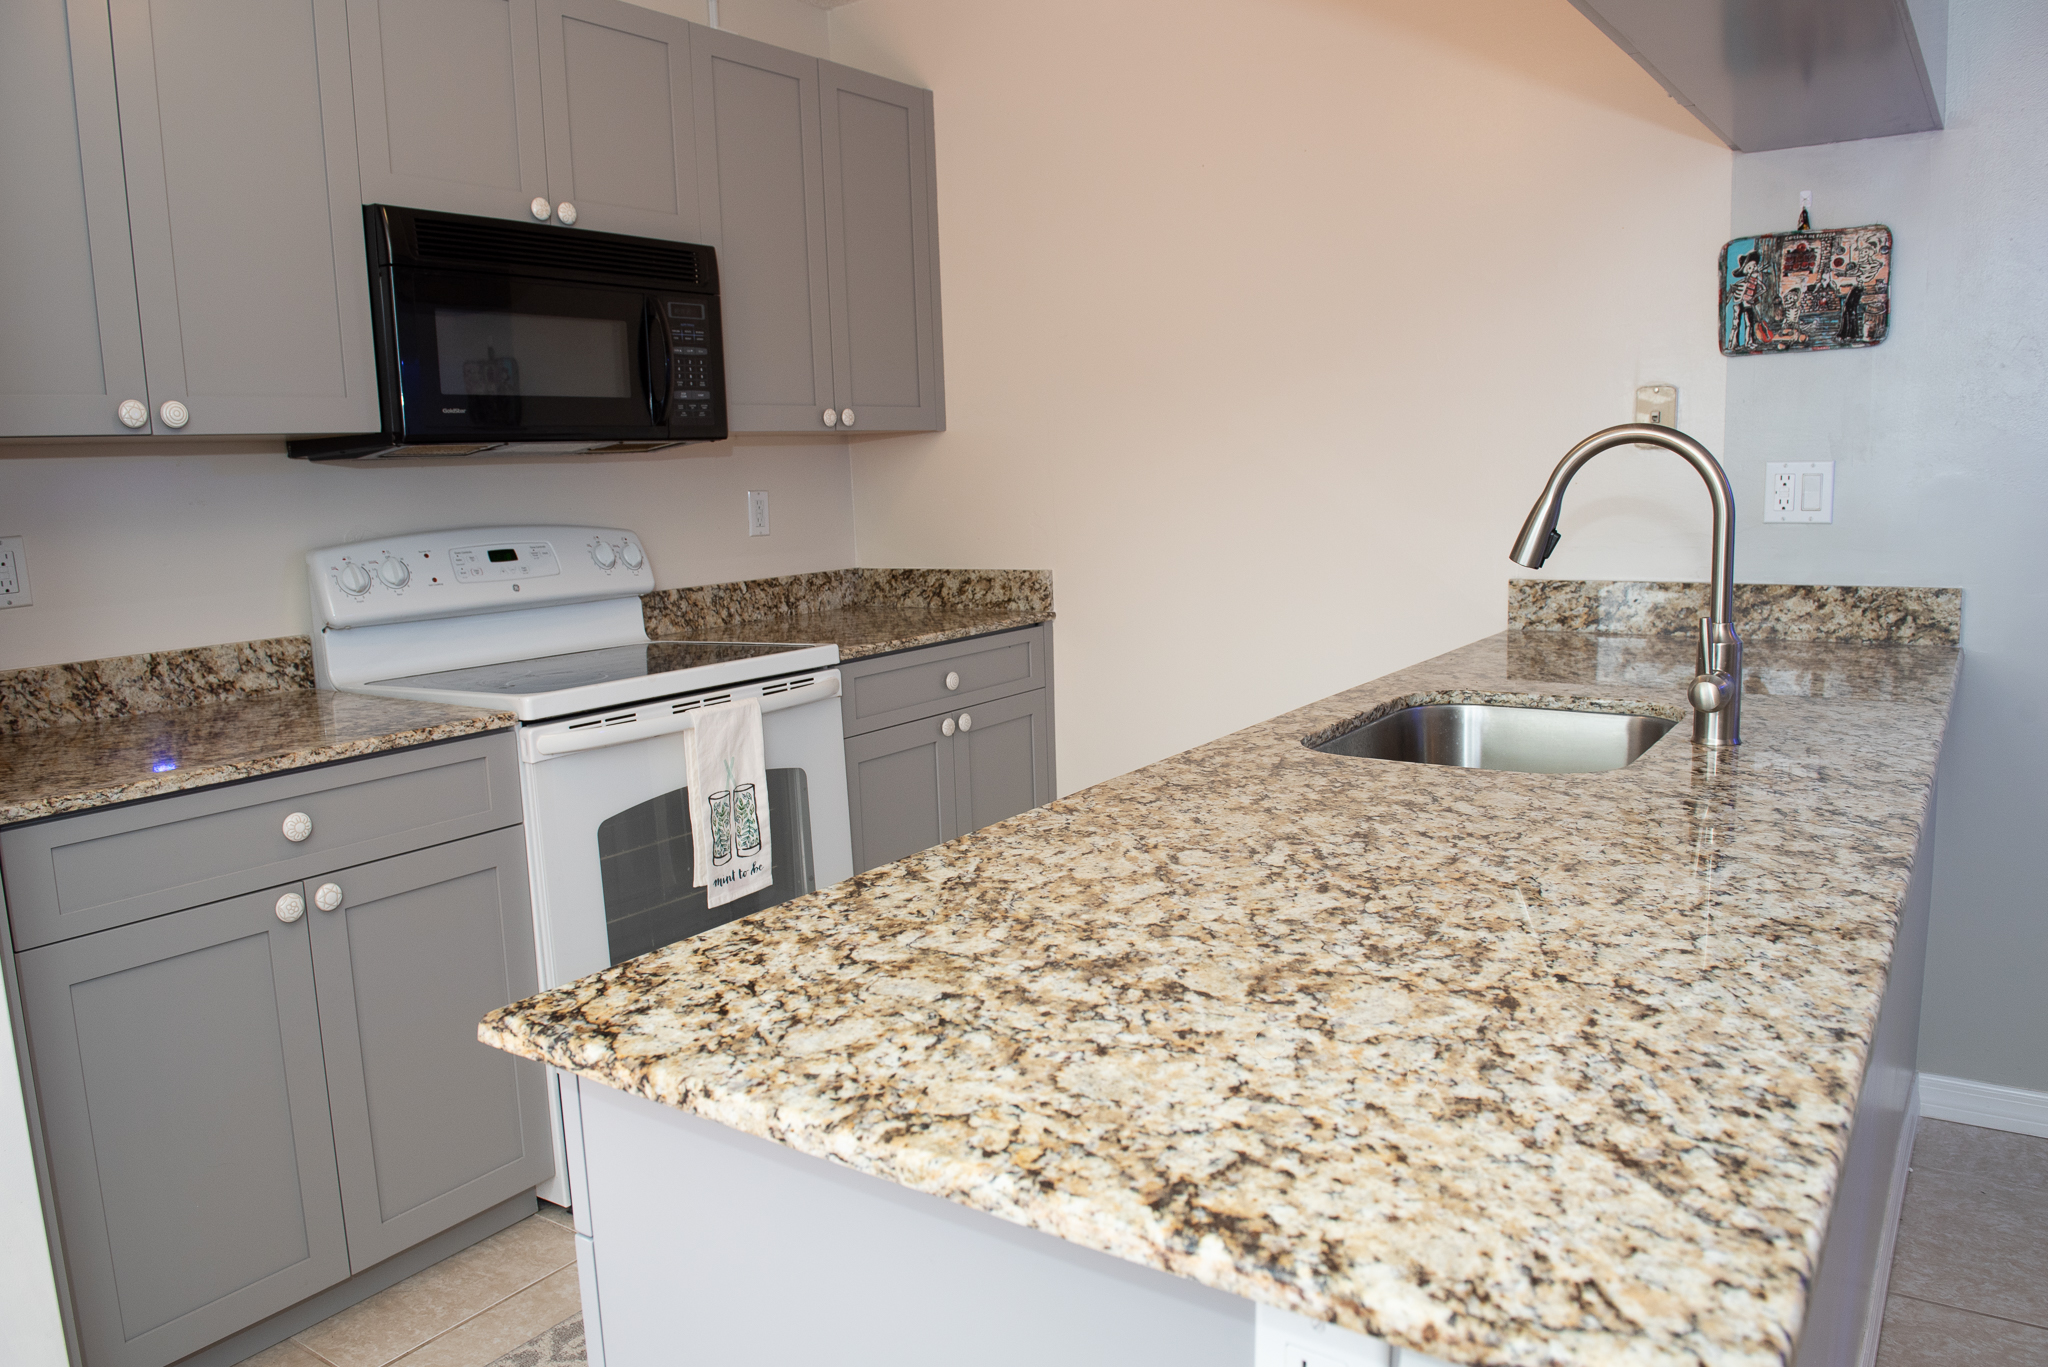 Everything You Need To Know About Granite Countertops